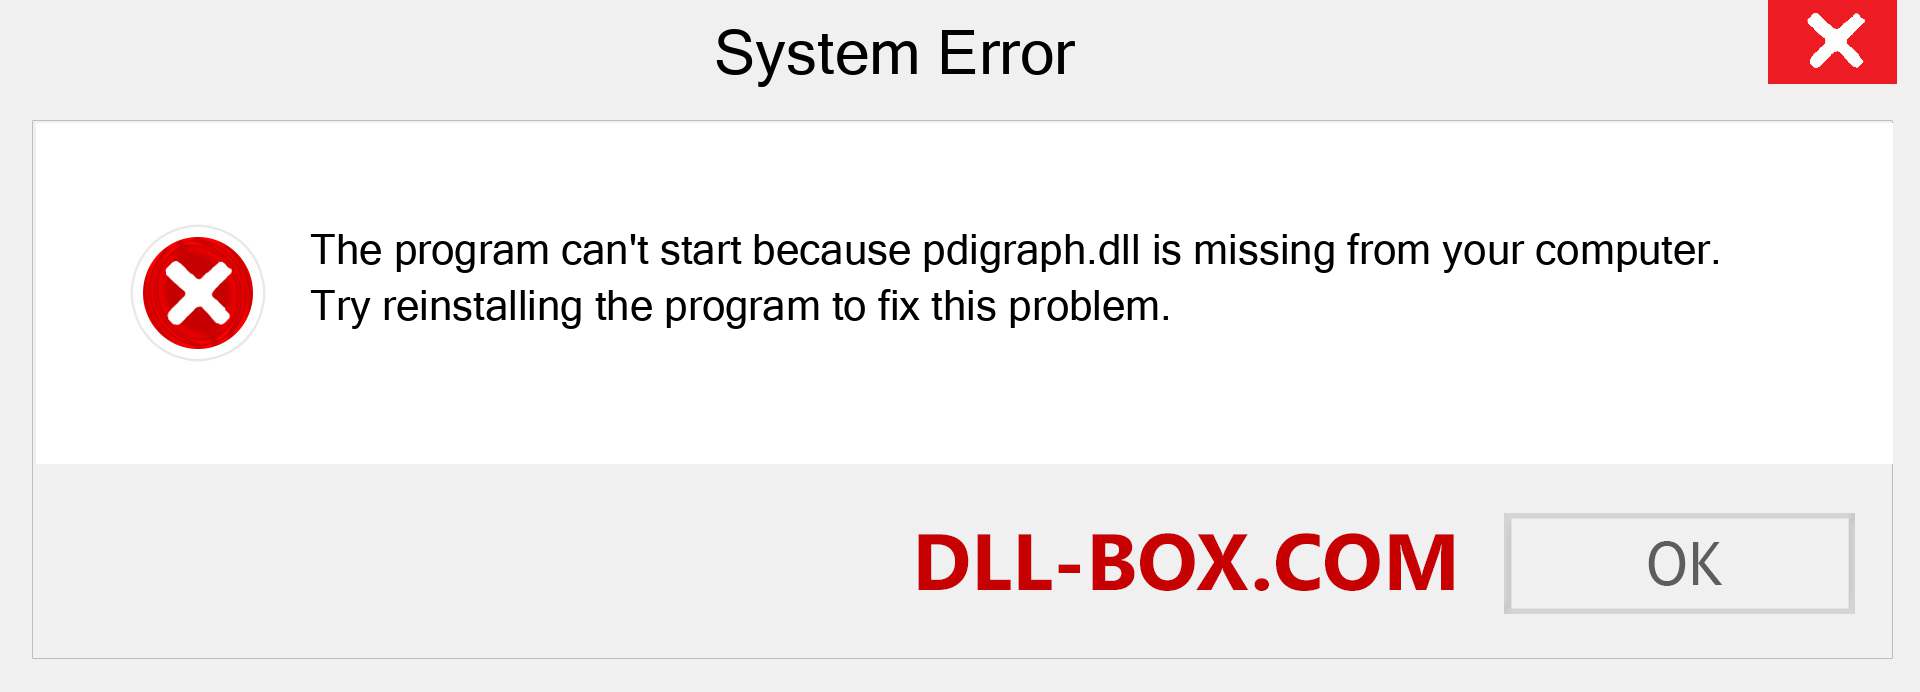  pdigraph.dll file is missing?. Download for Windows 7, 8, 10 - Fix  pdigraph dll Missing Error on Windows, photos, images